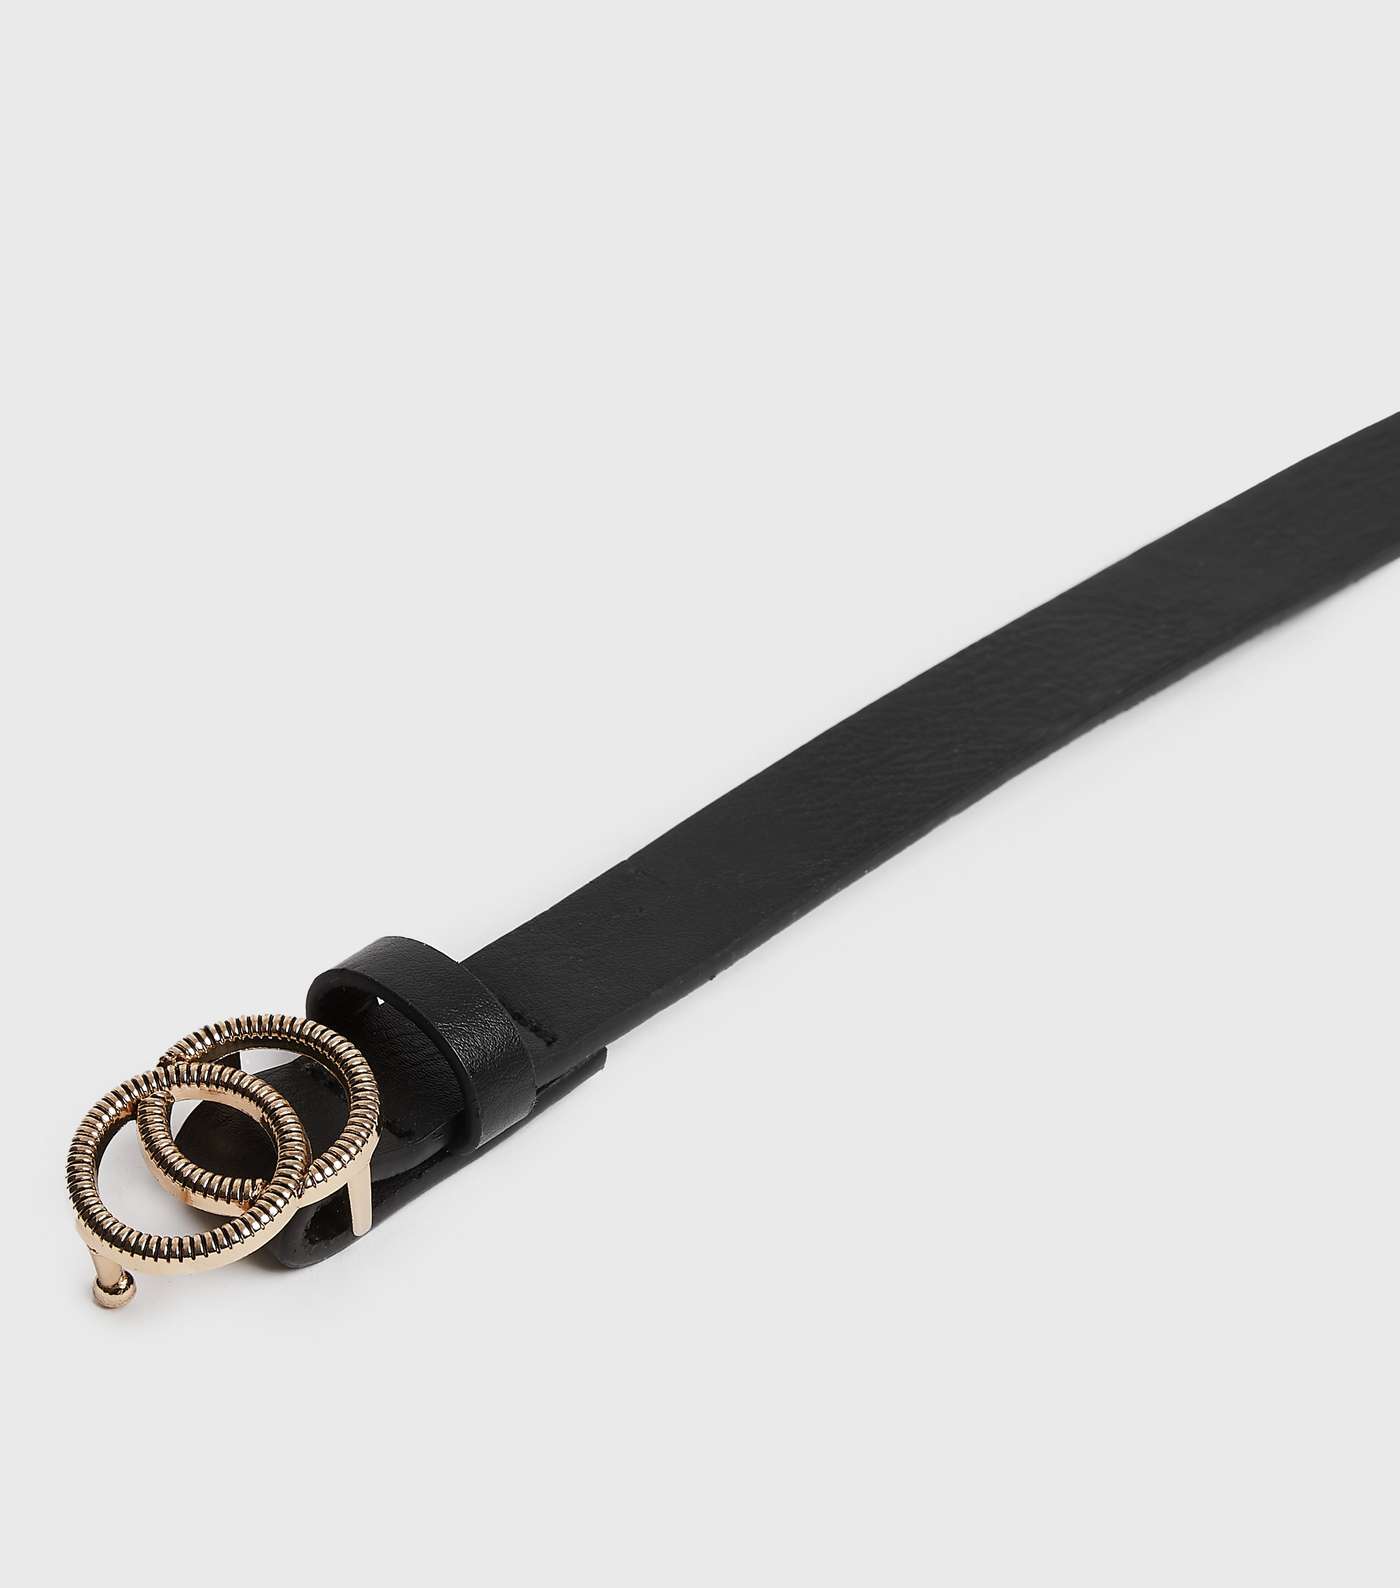 Black Leather-Look Textured Double Circle Belt Image 3